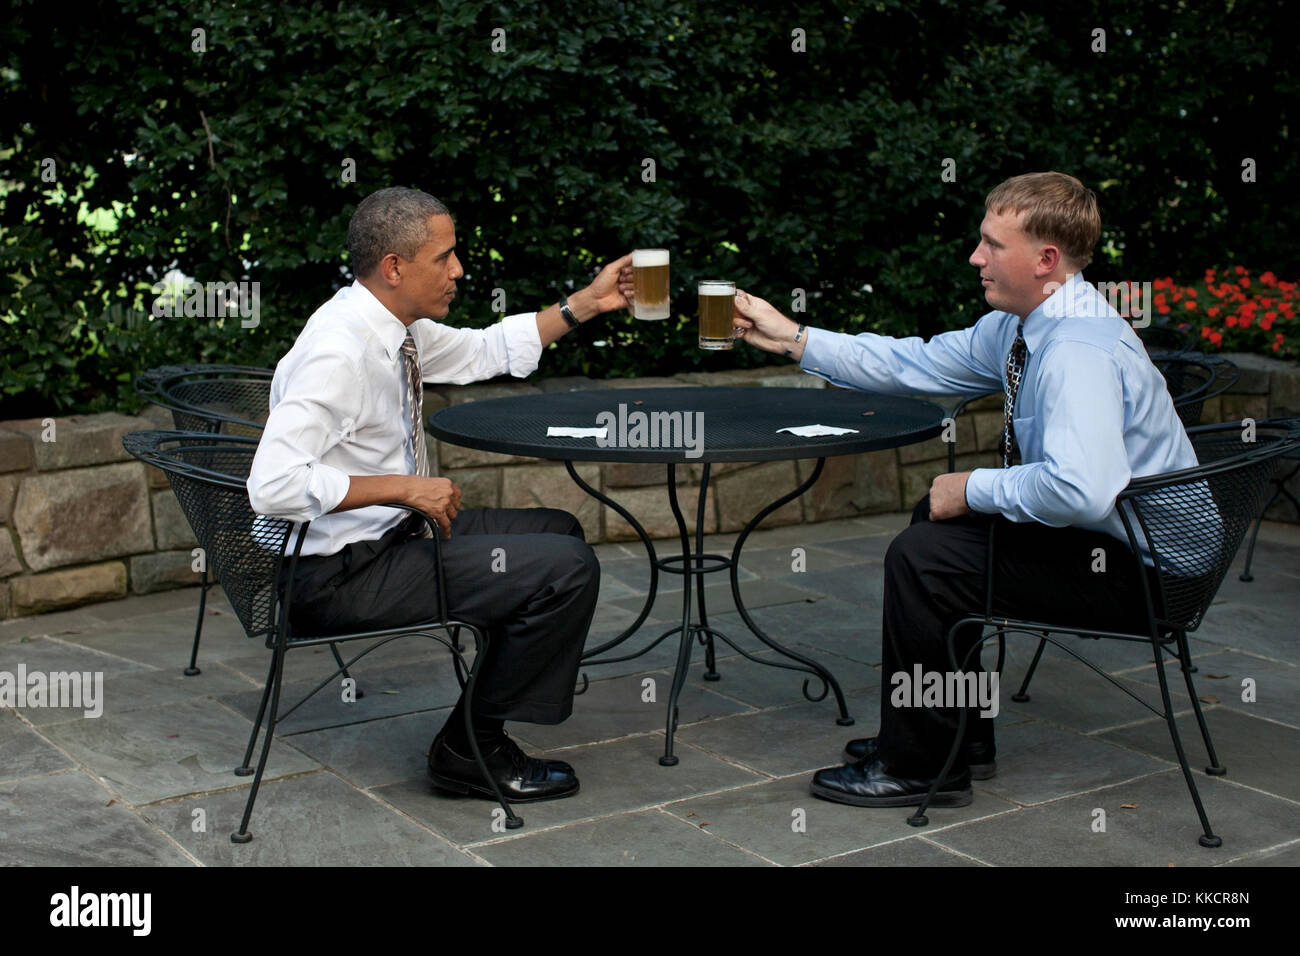 Sept. 14, 2011 'The President offers a toast to Medal of Honor recipient Dakota Meyer on the patio outside of the Oval Office. Before receiving the Medal, Meyer said he wished he could have a beer with the President; the President granted his wish and the next day awarded him the Medal during a ceremony at the White House.' Stock Photo